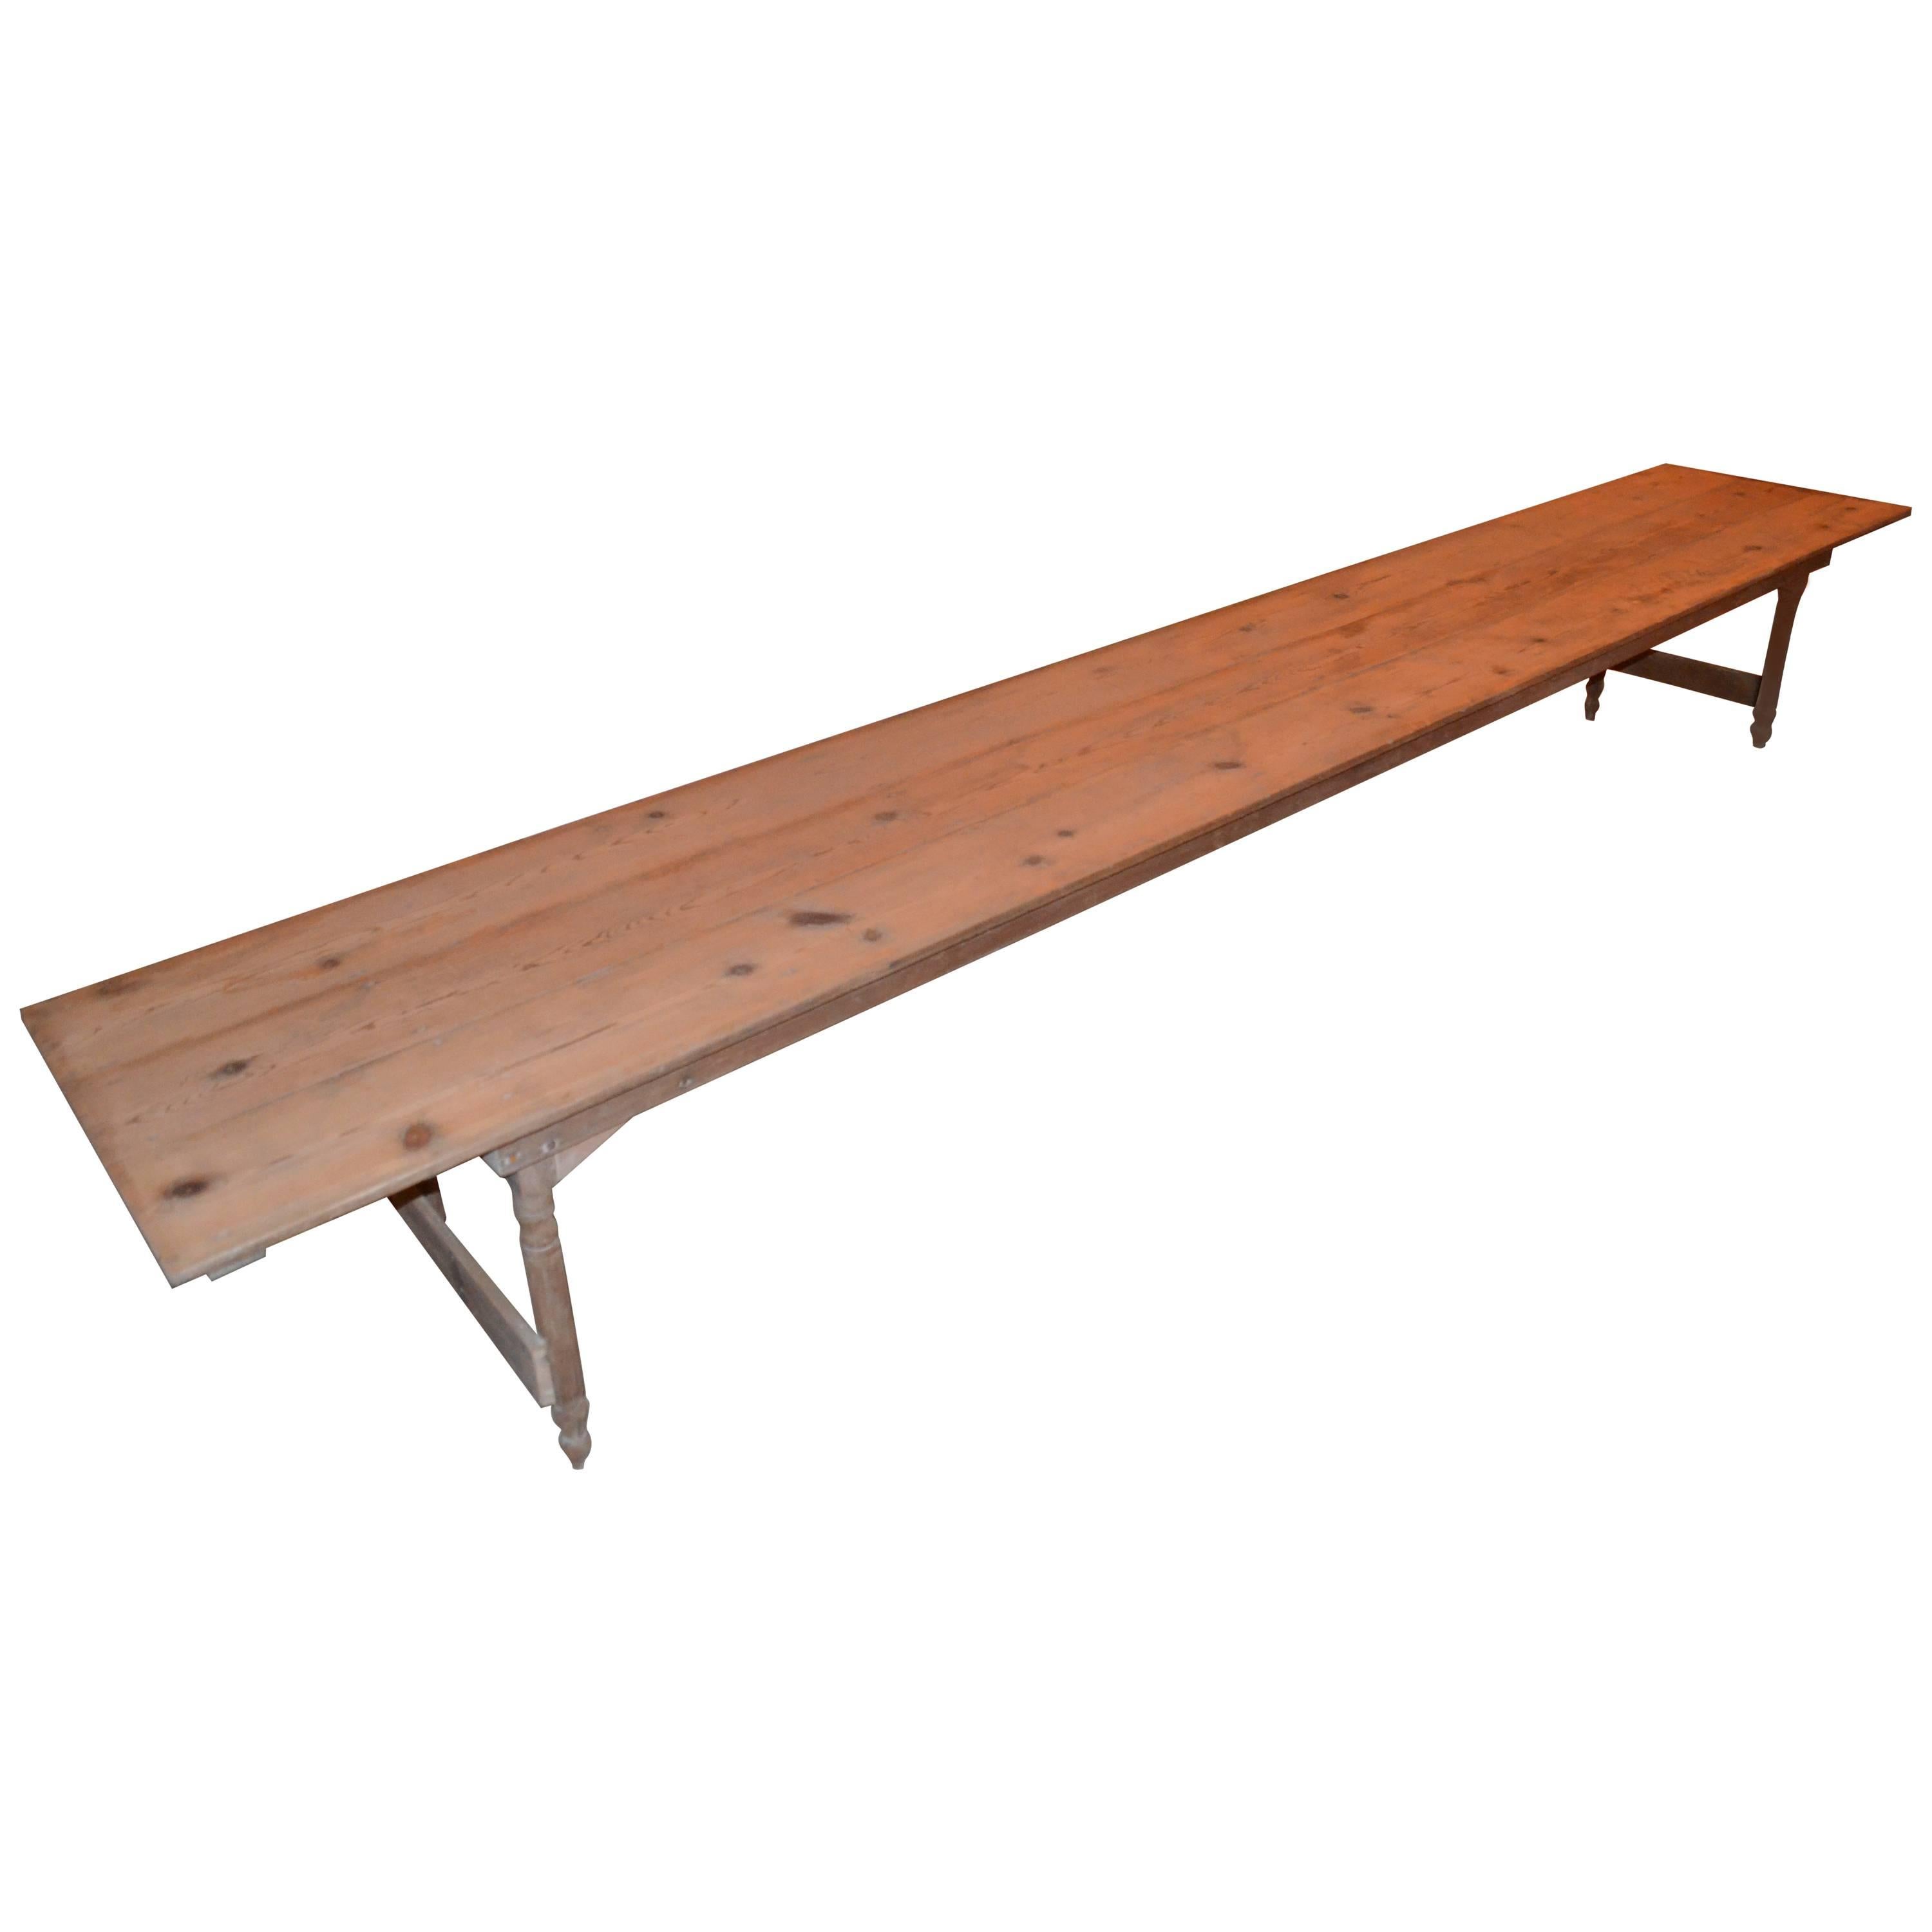 100-Year Old Harvest Table, 16 ft long, of Old Growth Pine